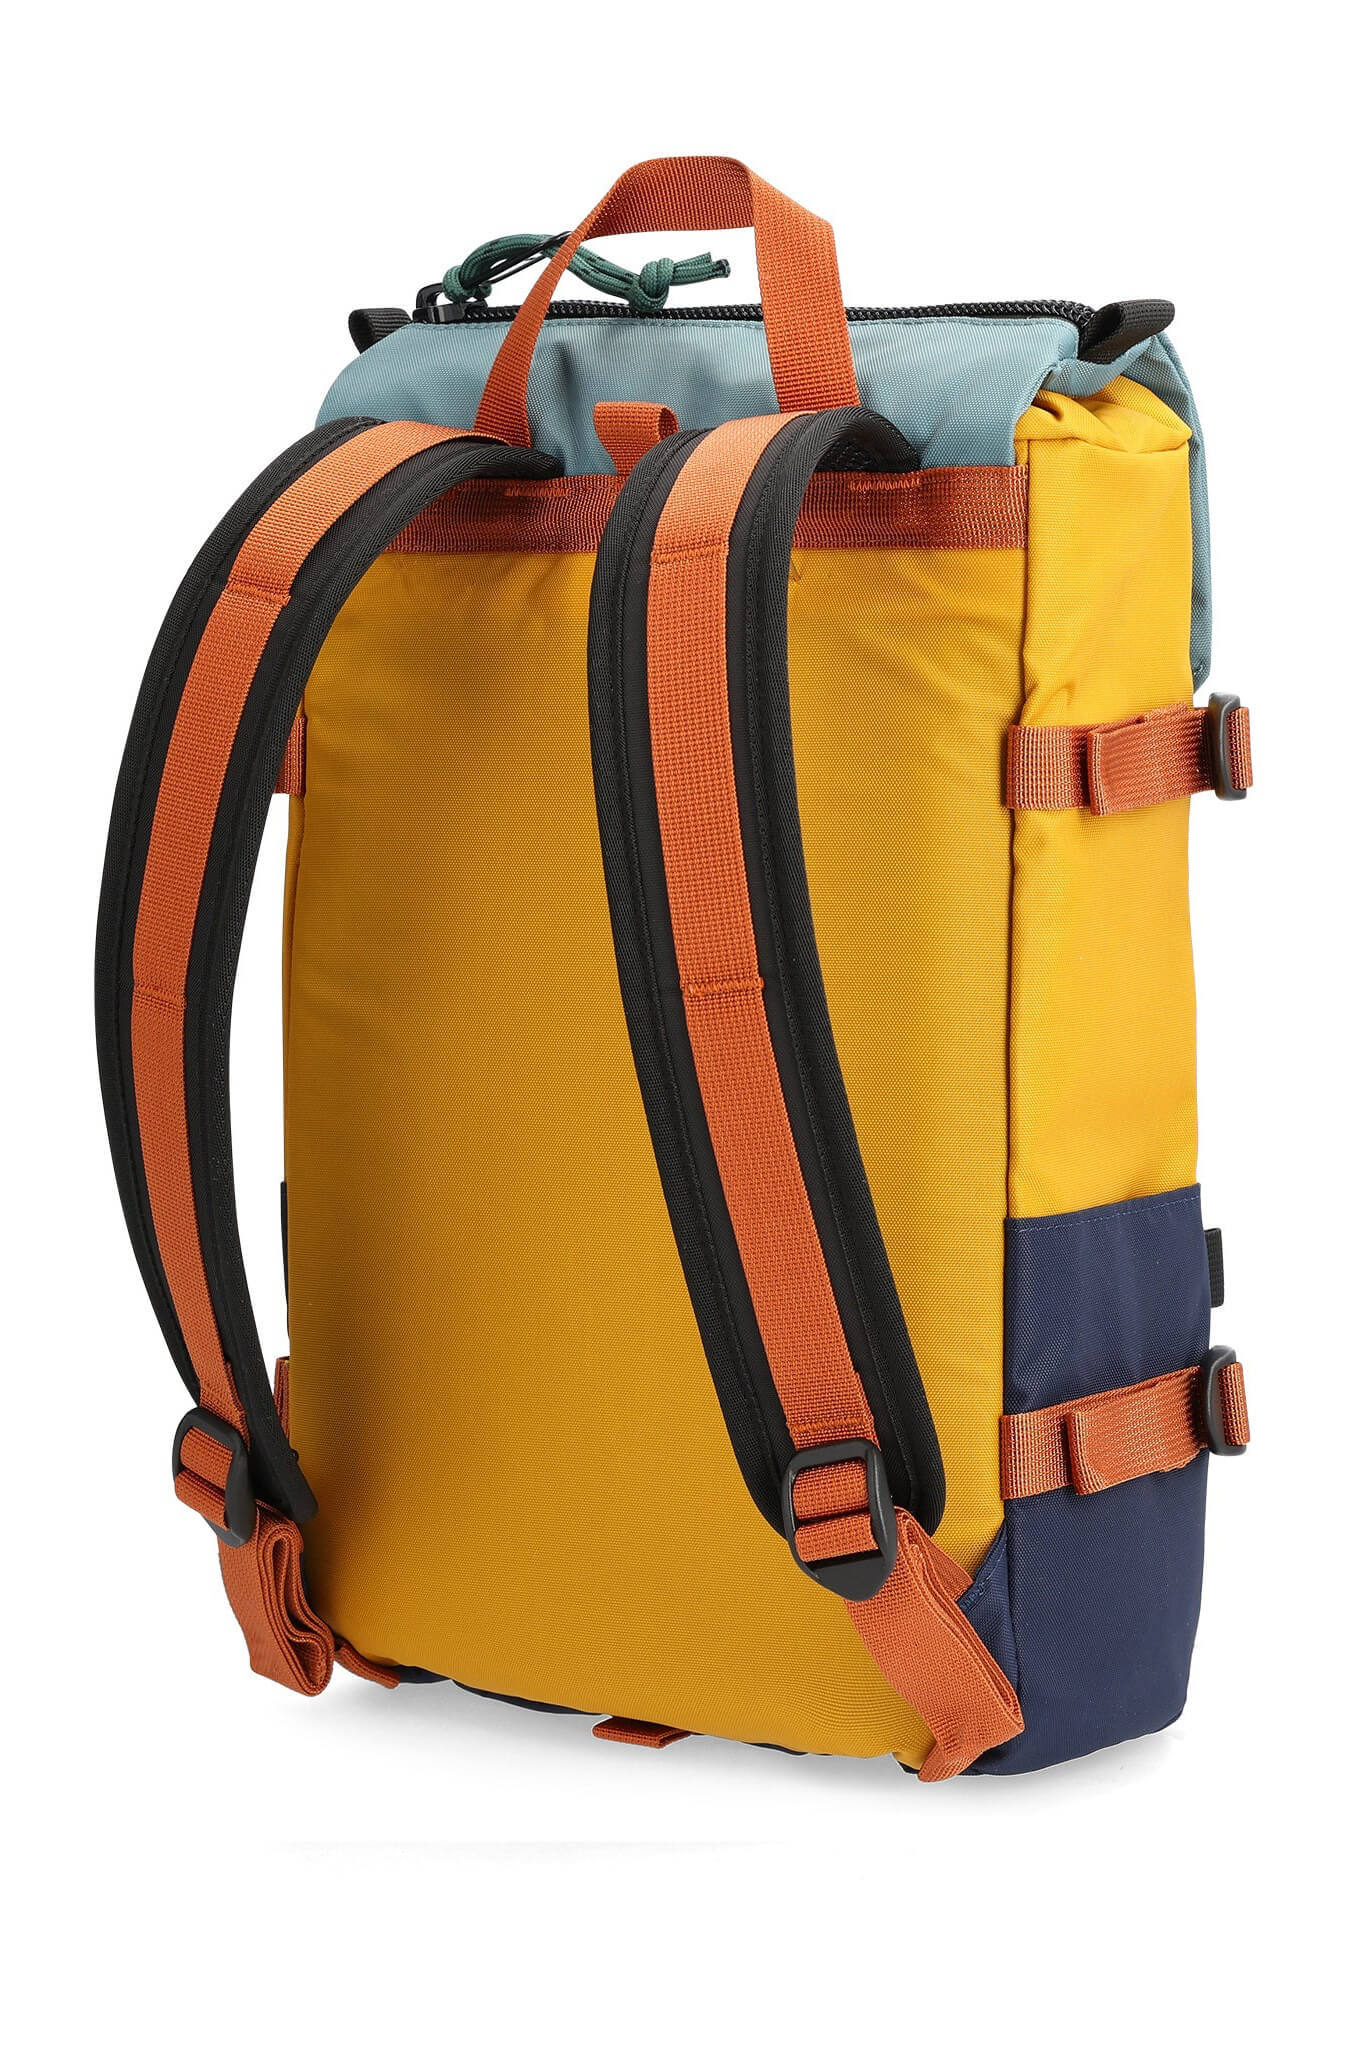 Topo Designs rover pack mini in navy and mustard